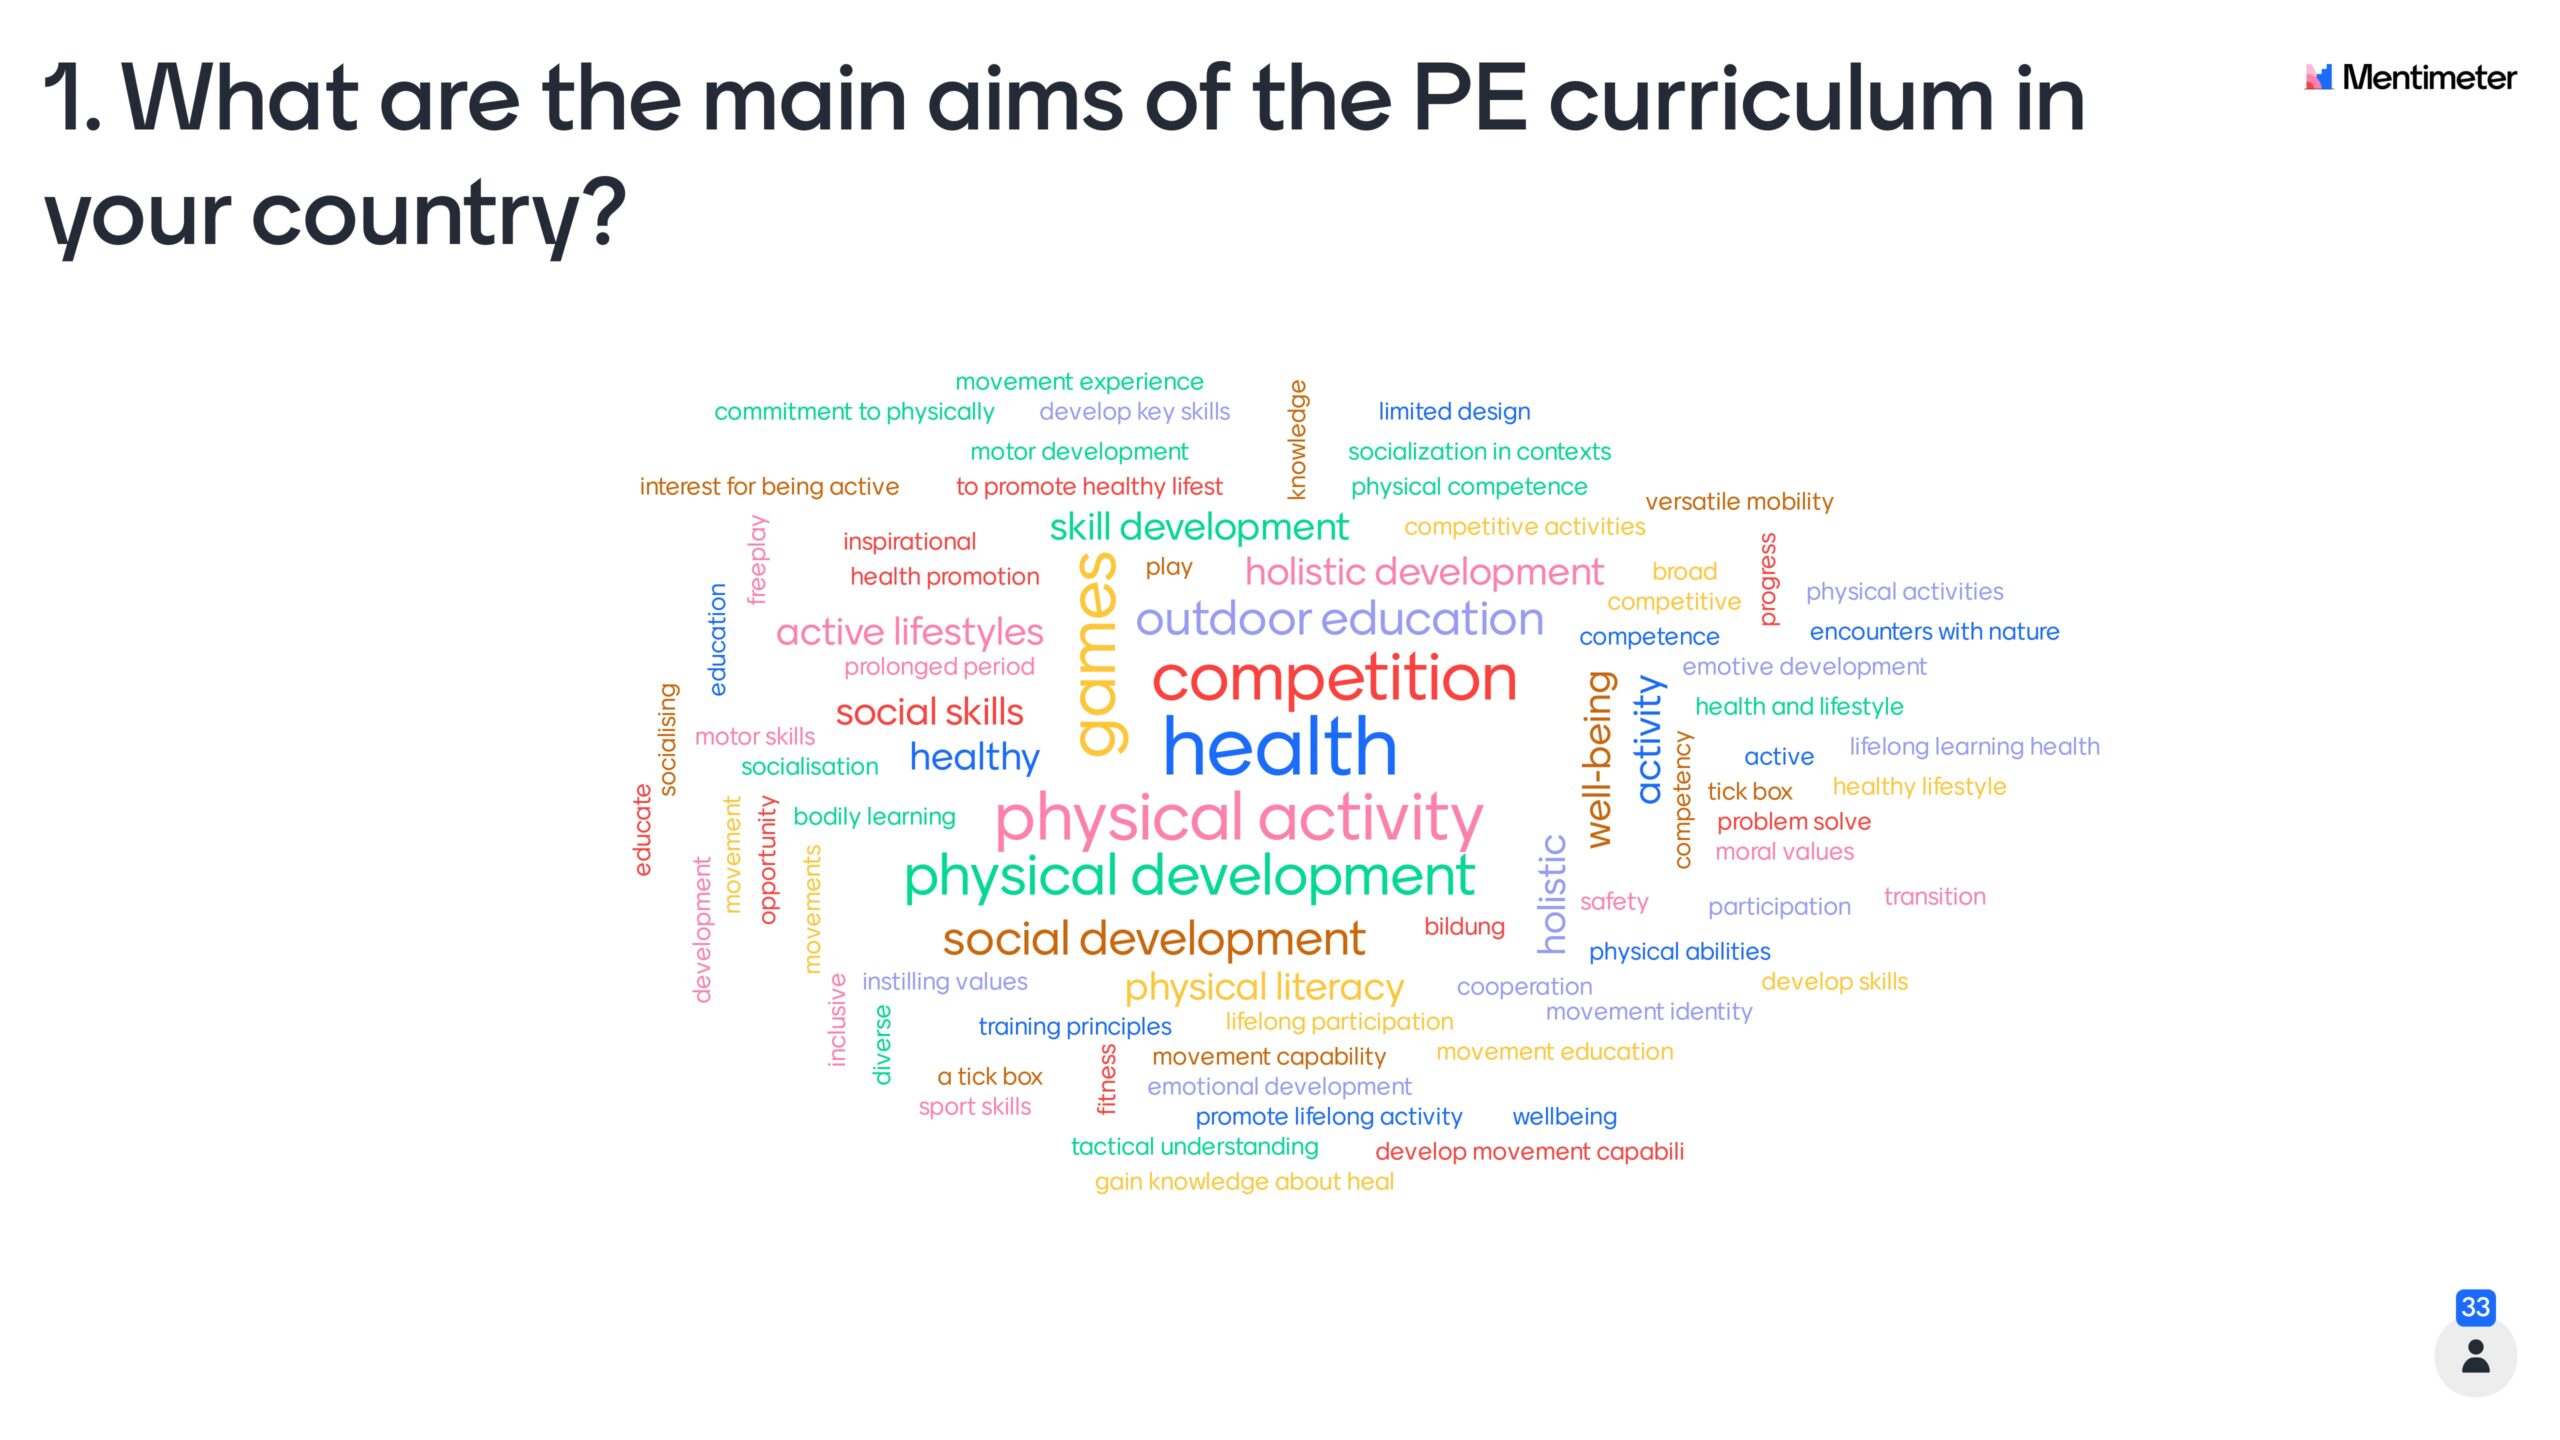 Word cloud describing the main aims of the PE curricula in responders' home countries